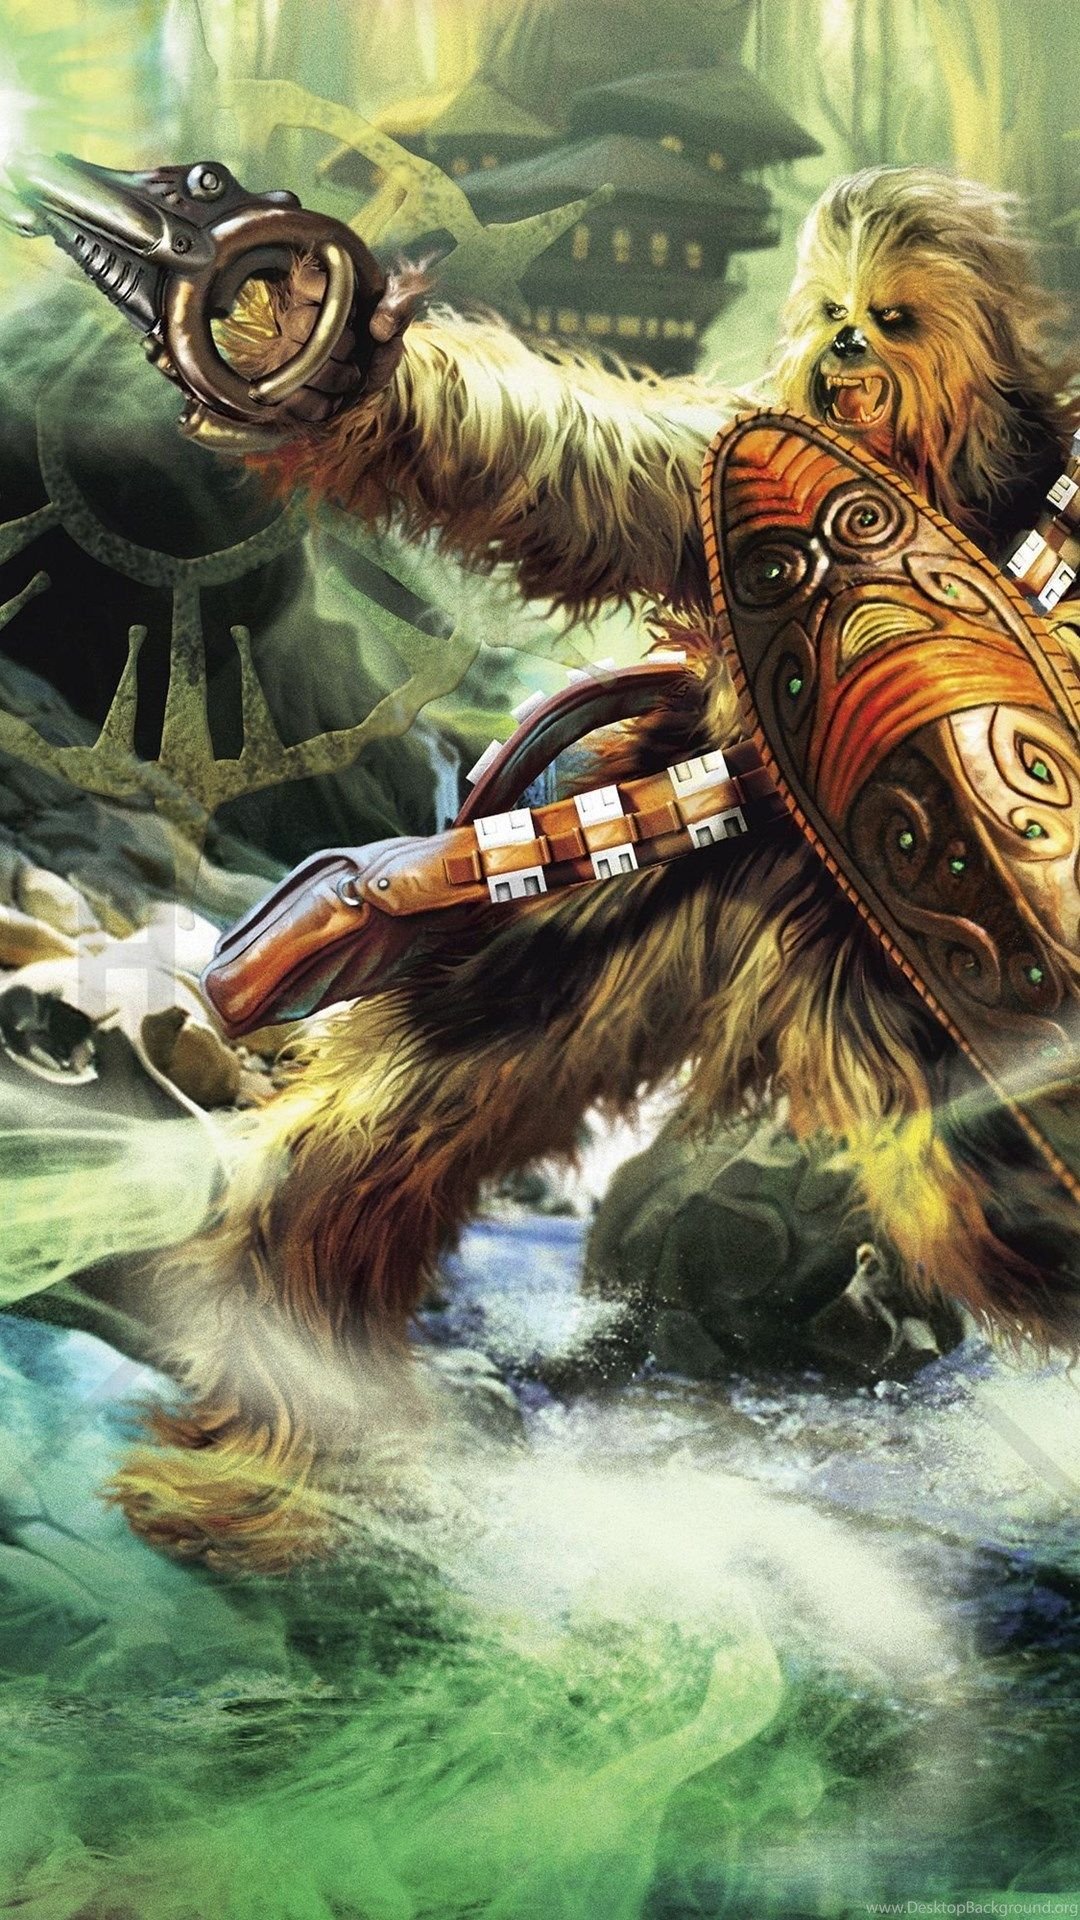 Star Wars Chewbacca With Shield Wall Mural & Photo Wallpaper. Desktop Background